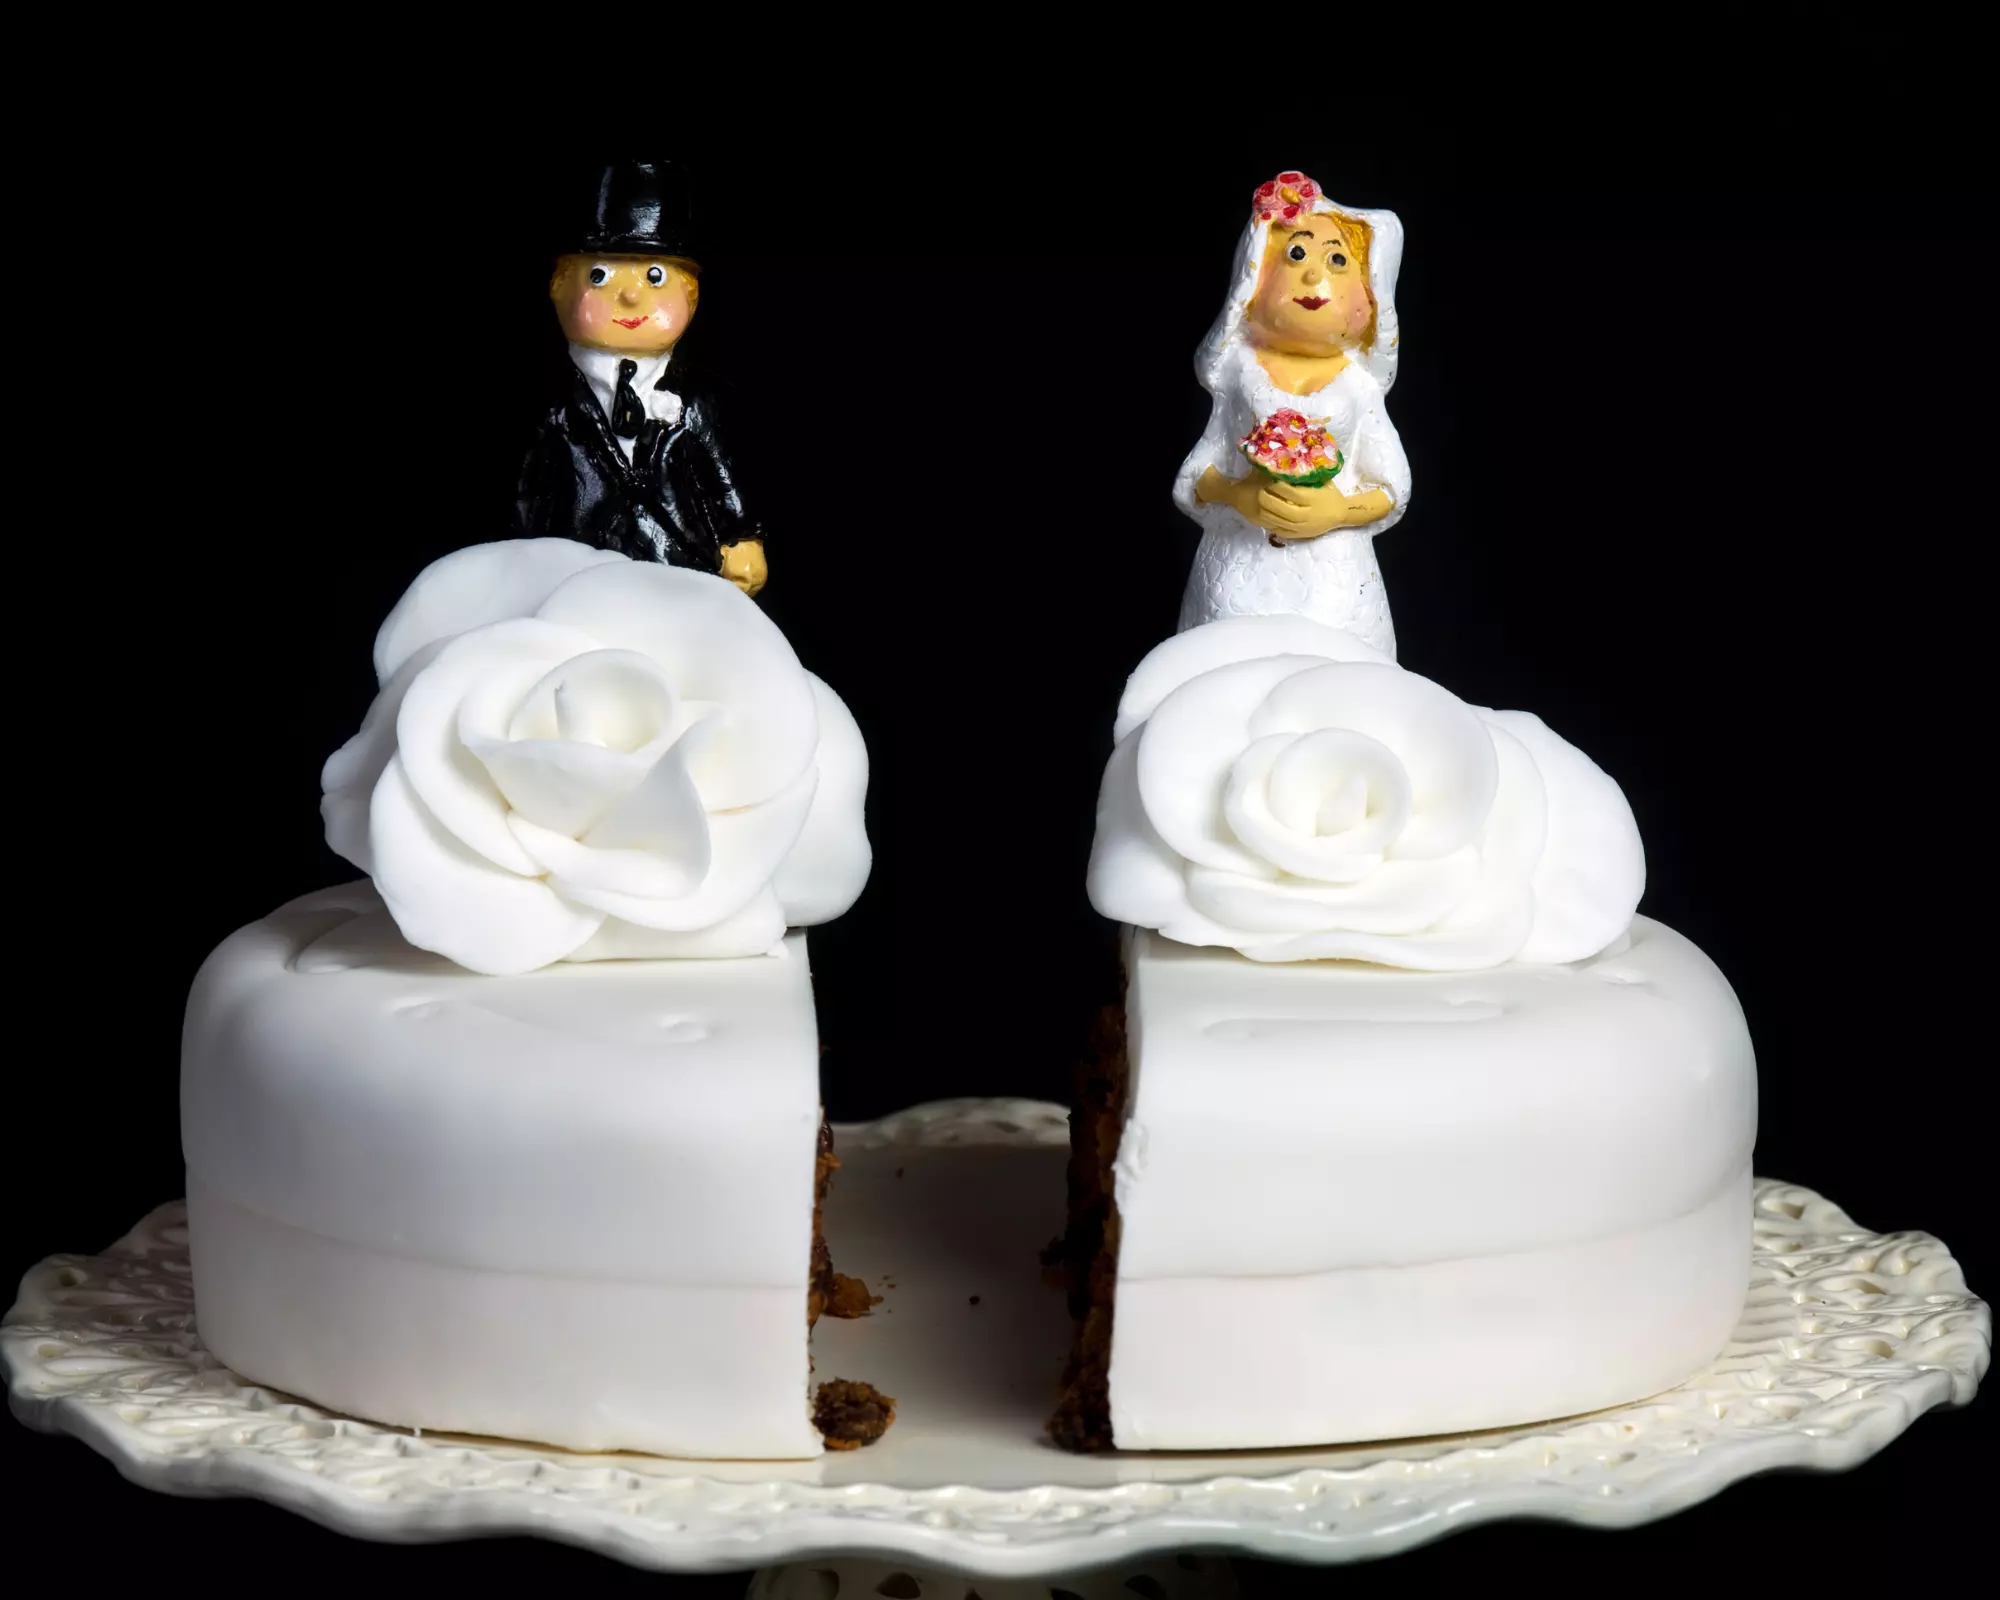 Why You Need To Have A Divorce Party And How To Celebrate The Right Way